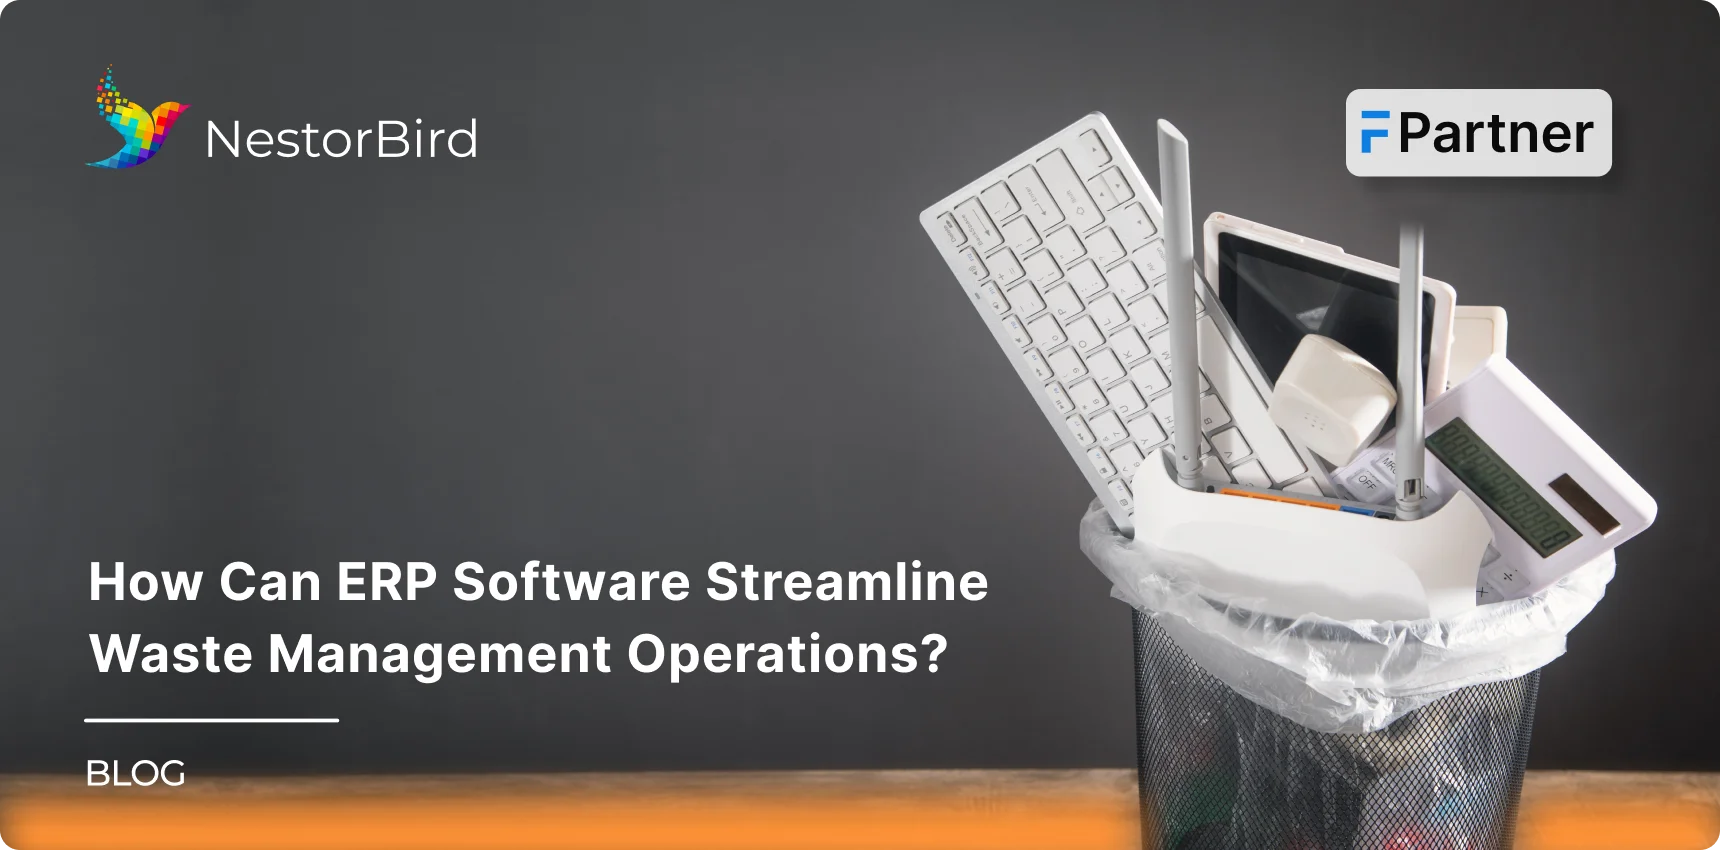 How Can ERP Software Streamline Waste Management Operations?